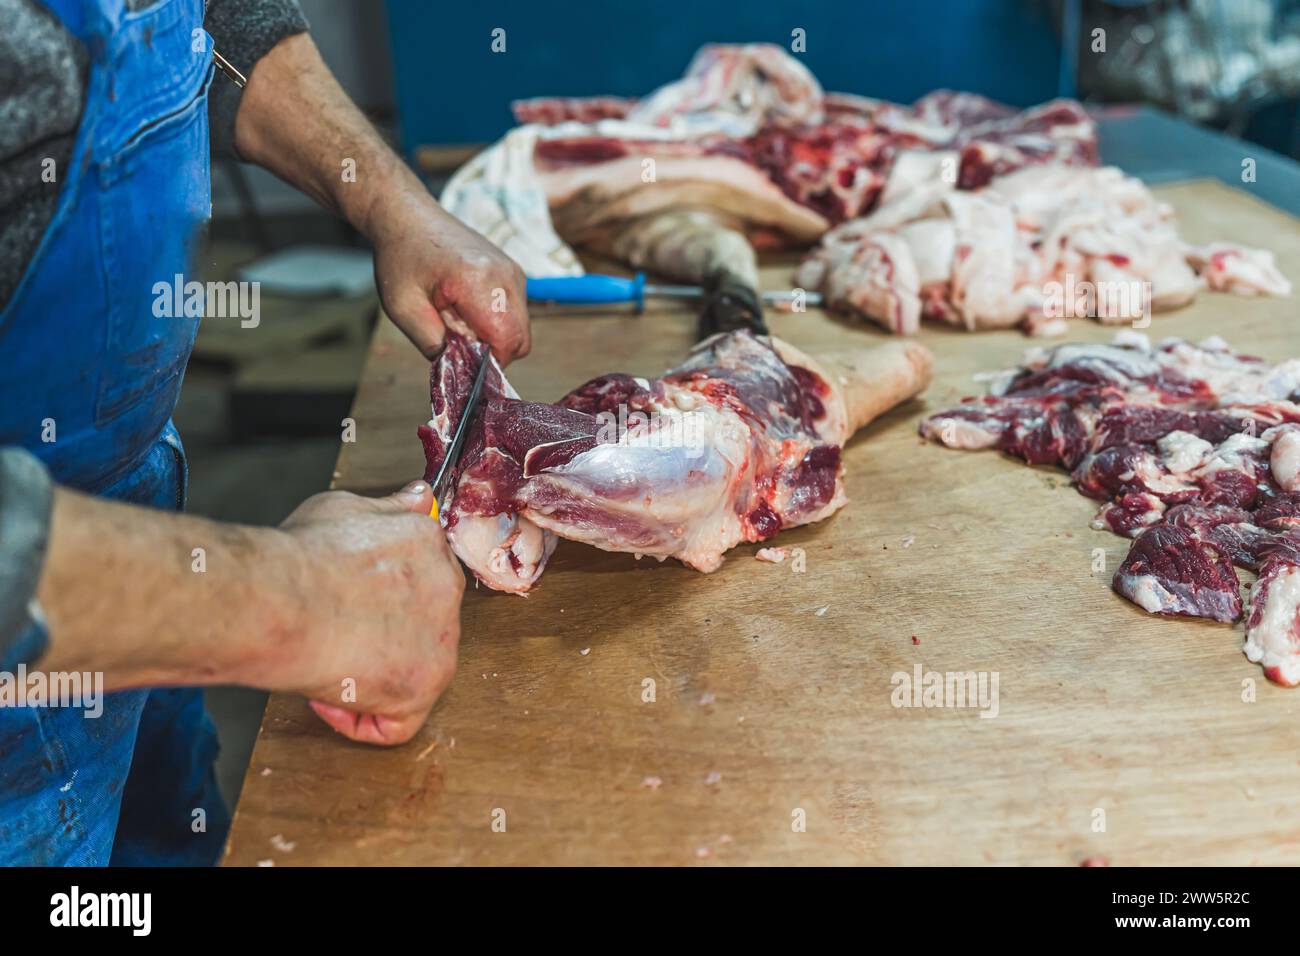 Meat processing in food industry, cutting pork into pieces. High quality photo Stock Photo